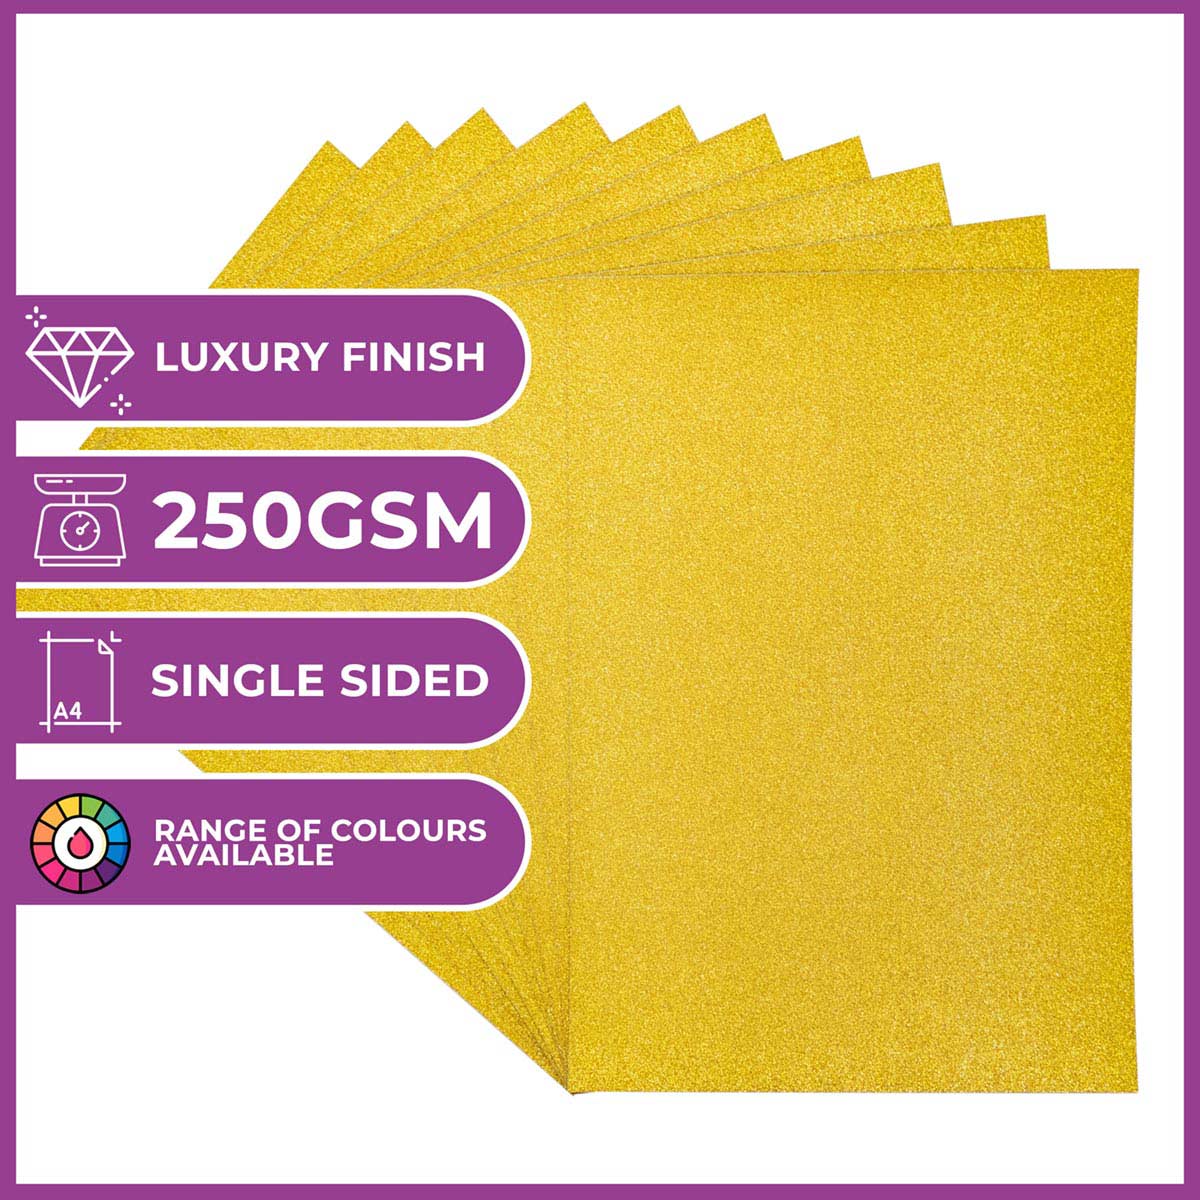 Crafter's Companion - A4 Glitter Card - 250gsm 10 Sheets - Solar Gold